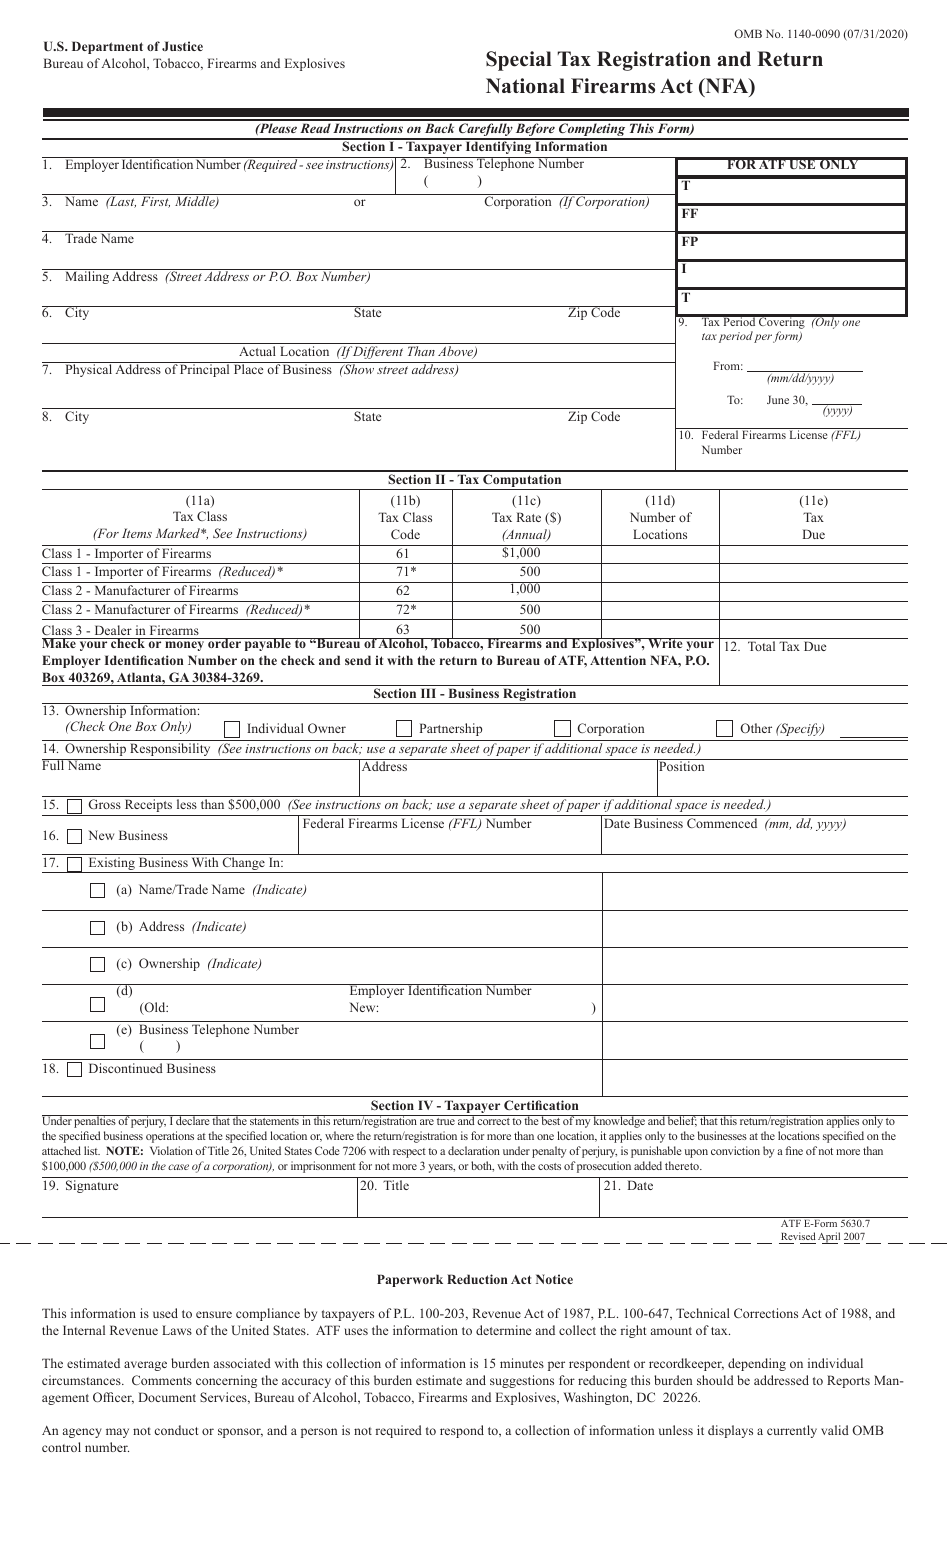 ATF Form 5630.7 Special Tax Registration and Return - National Firearms Act (Nfa), Page 1